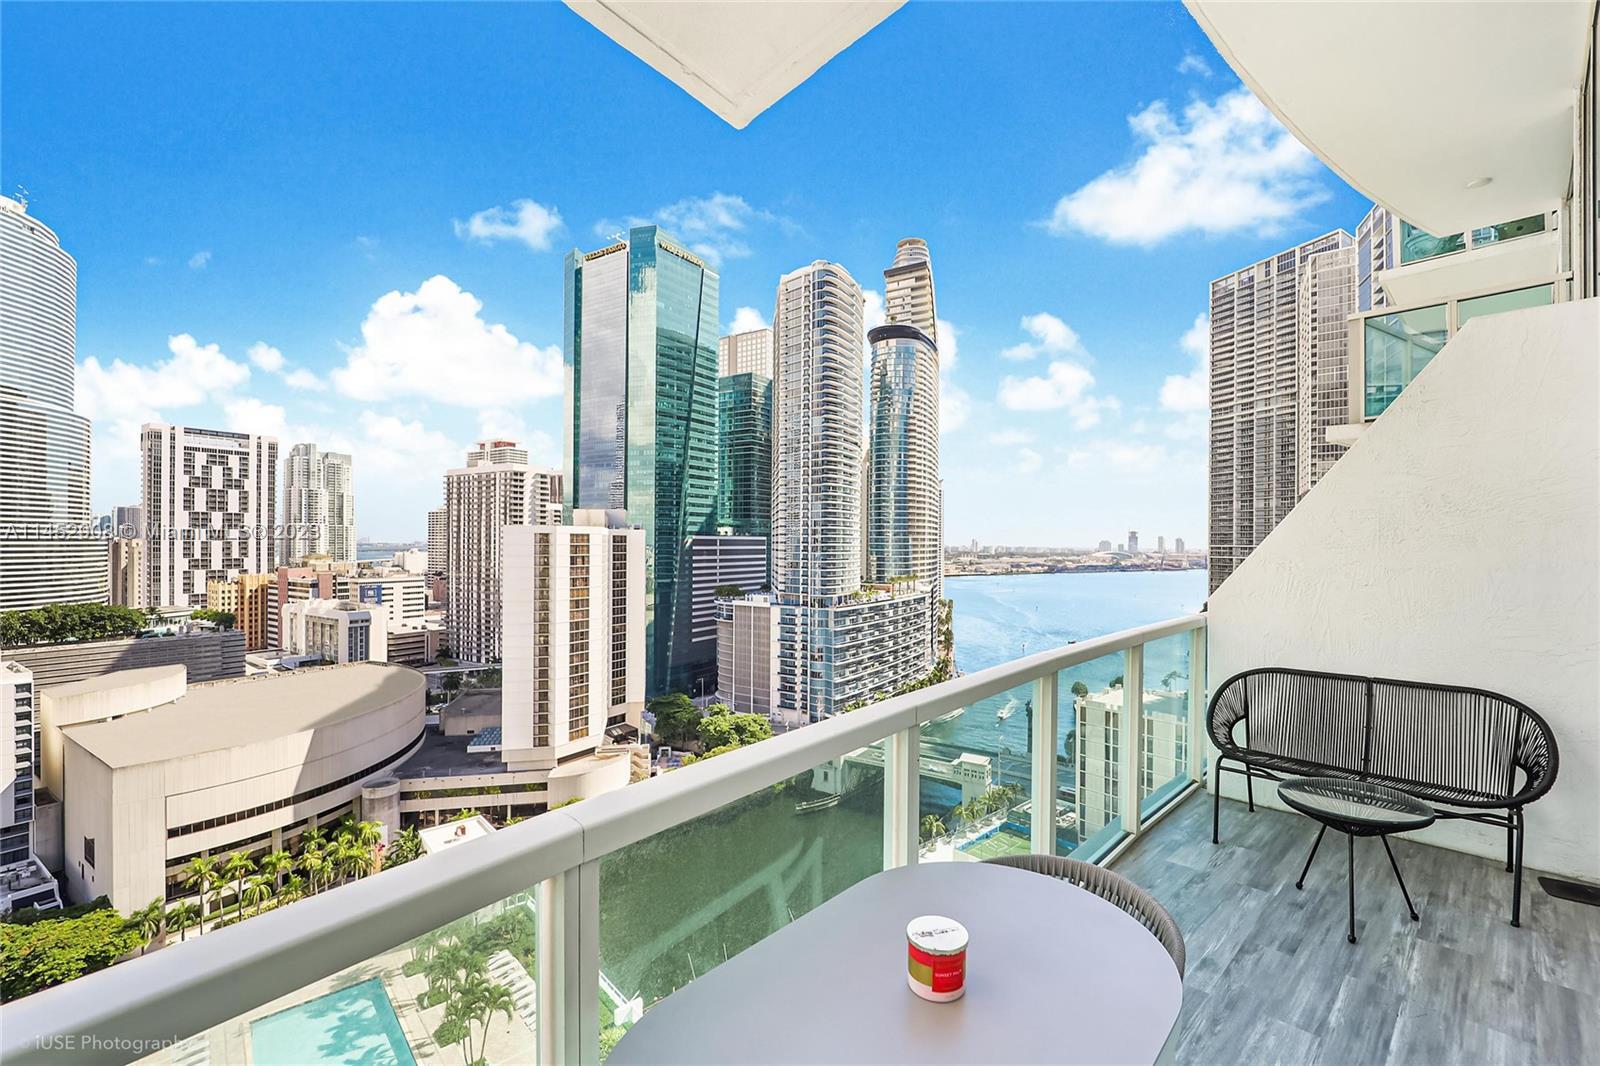 Brickell on the River South is one of the very few Airbnb approved buildings centrally located in Br